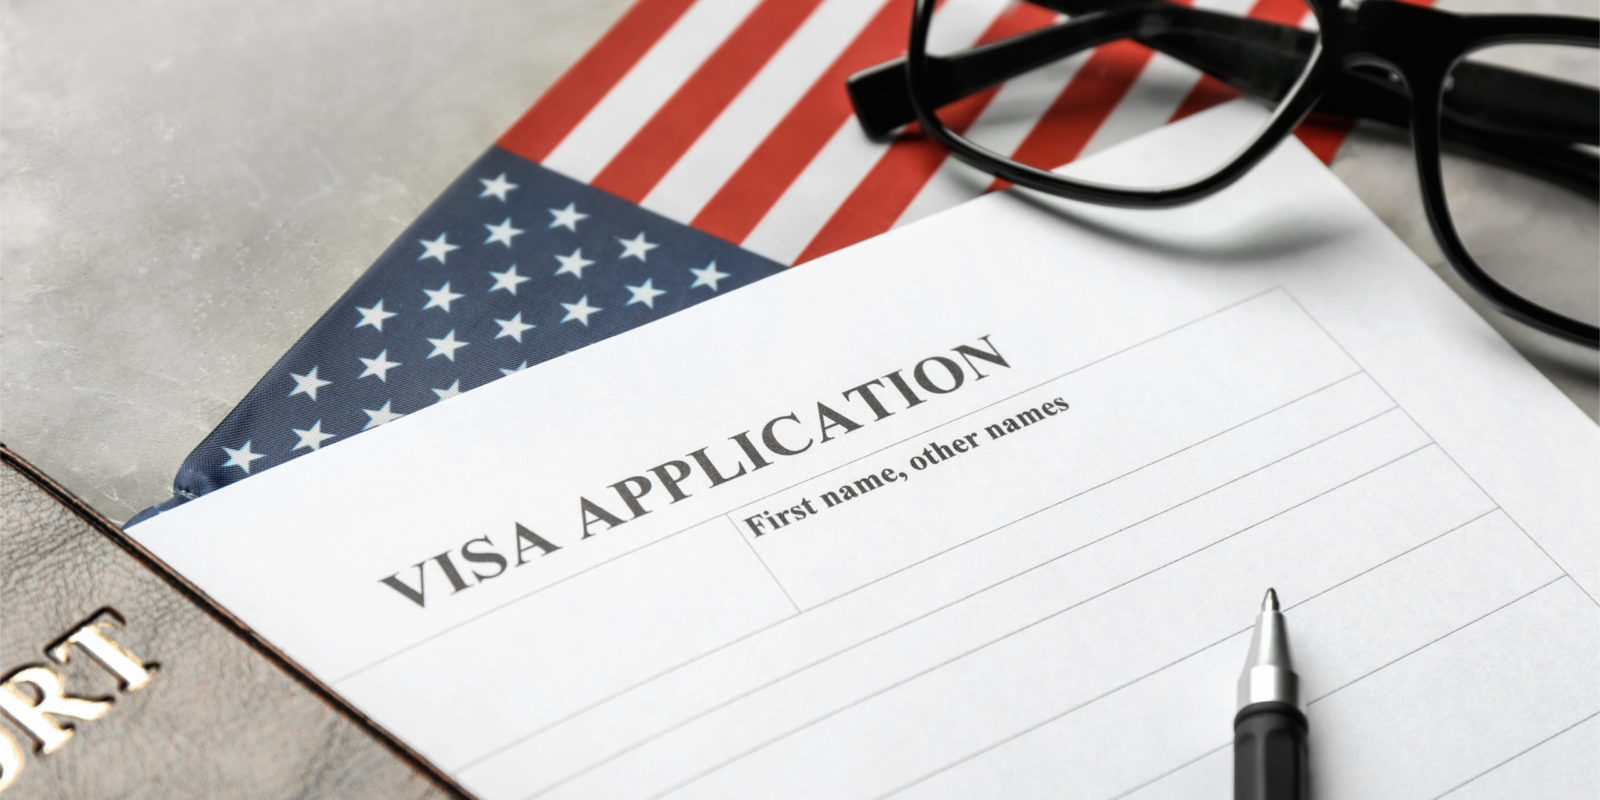 h-1b visa application has requirements that has to be met before it can be reviewed